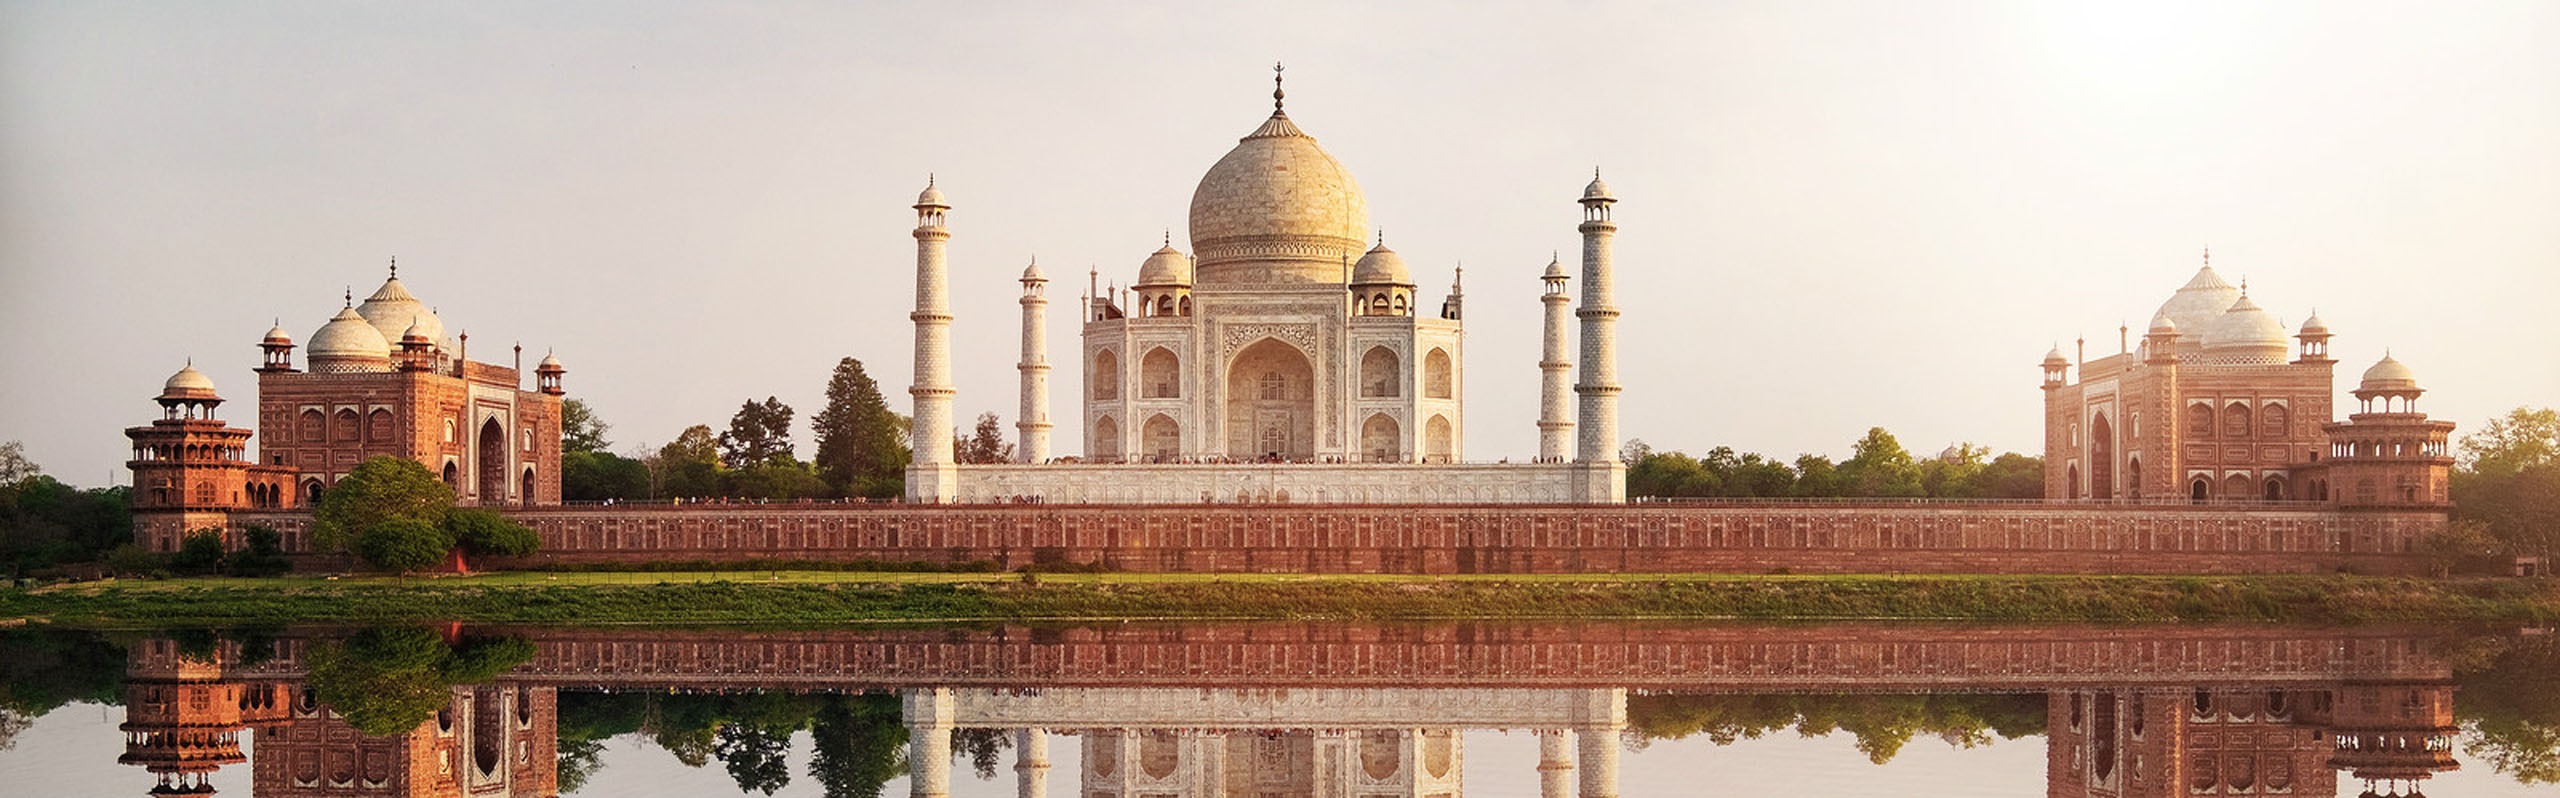 Top 12 Most Common Questions&Answers about the Taj Mahal